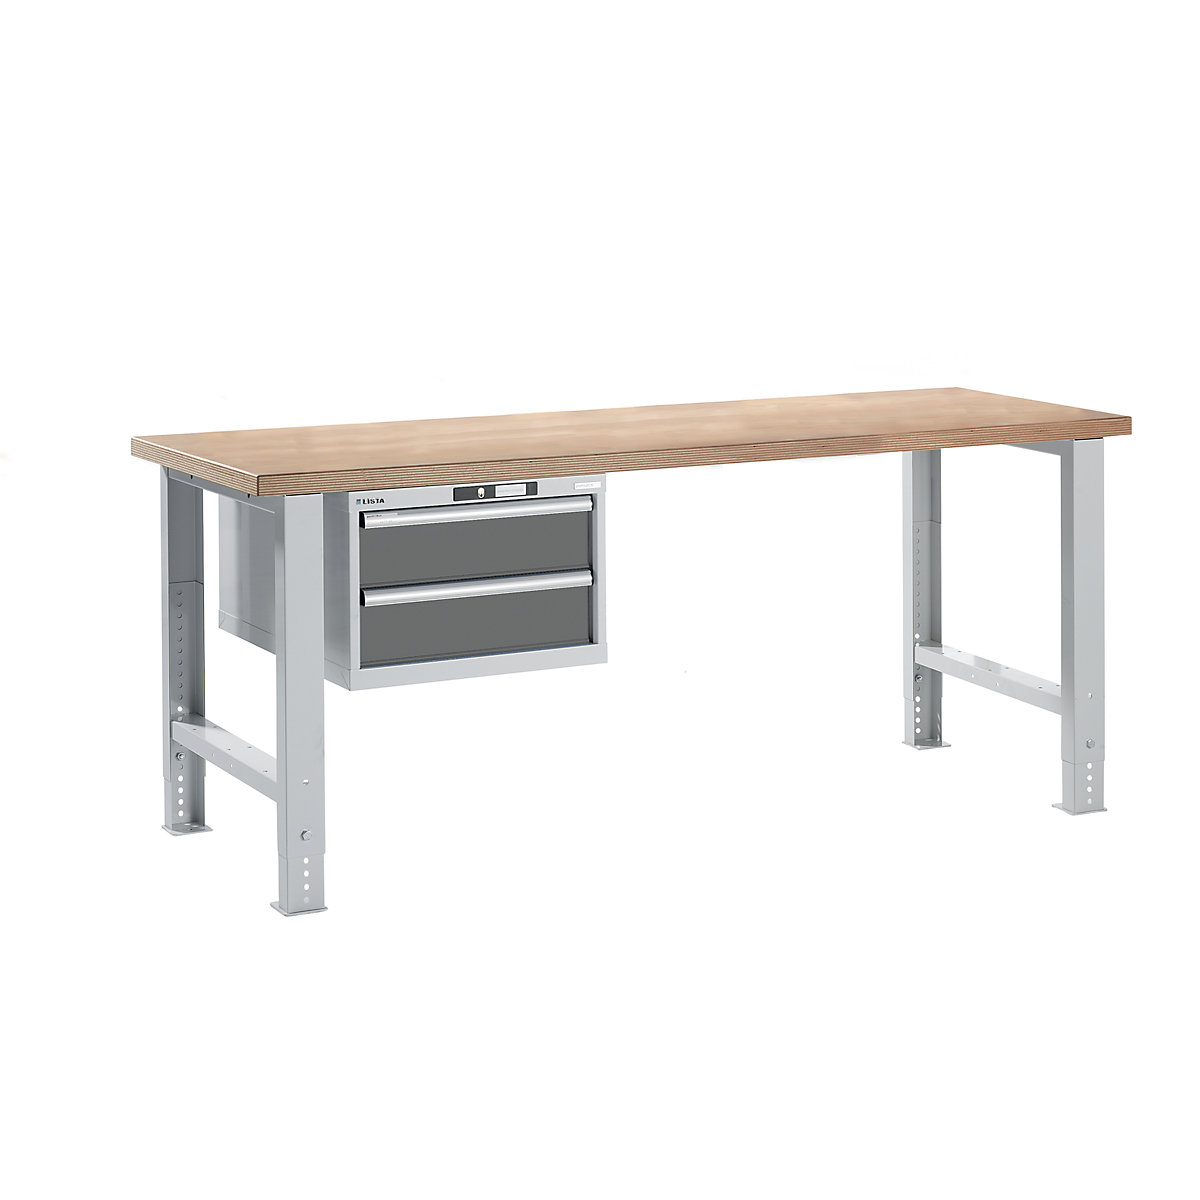 Modular workbench – LISTA, height 740 – 1090 mm, suspended drawer unit, 2 drawers, metallic grey, table width 2000 mm-14